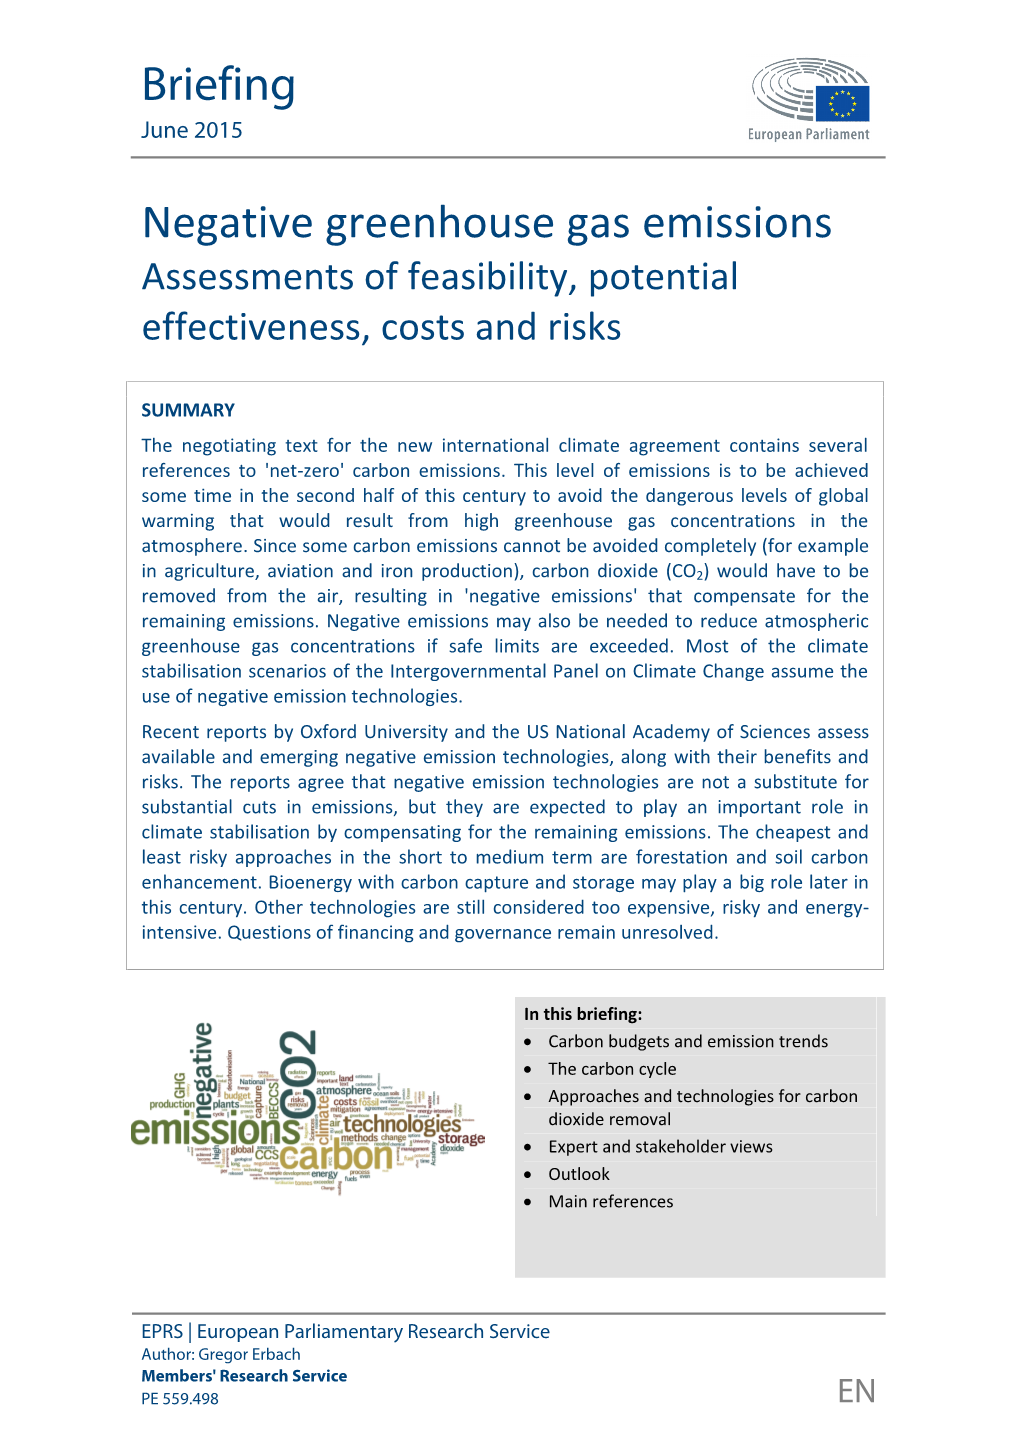 Negative Greenhouse Gas Emissions Assessments of Feasibility, Potential Effectiveness, Costs and Risks